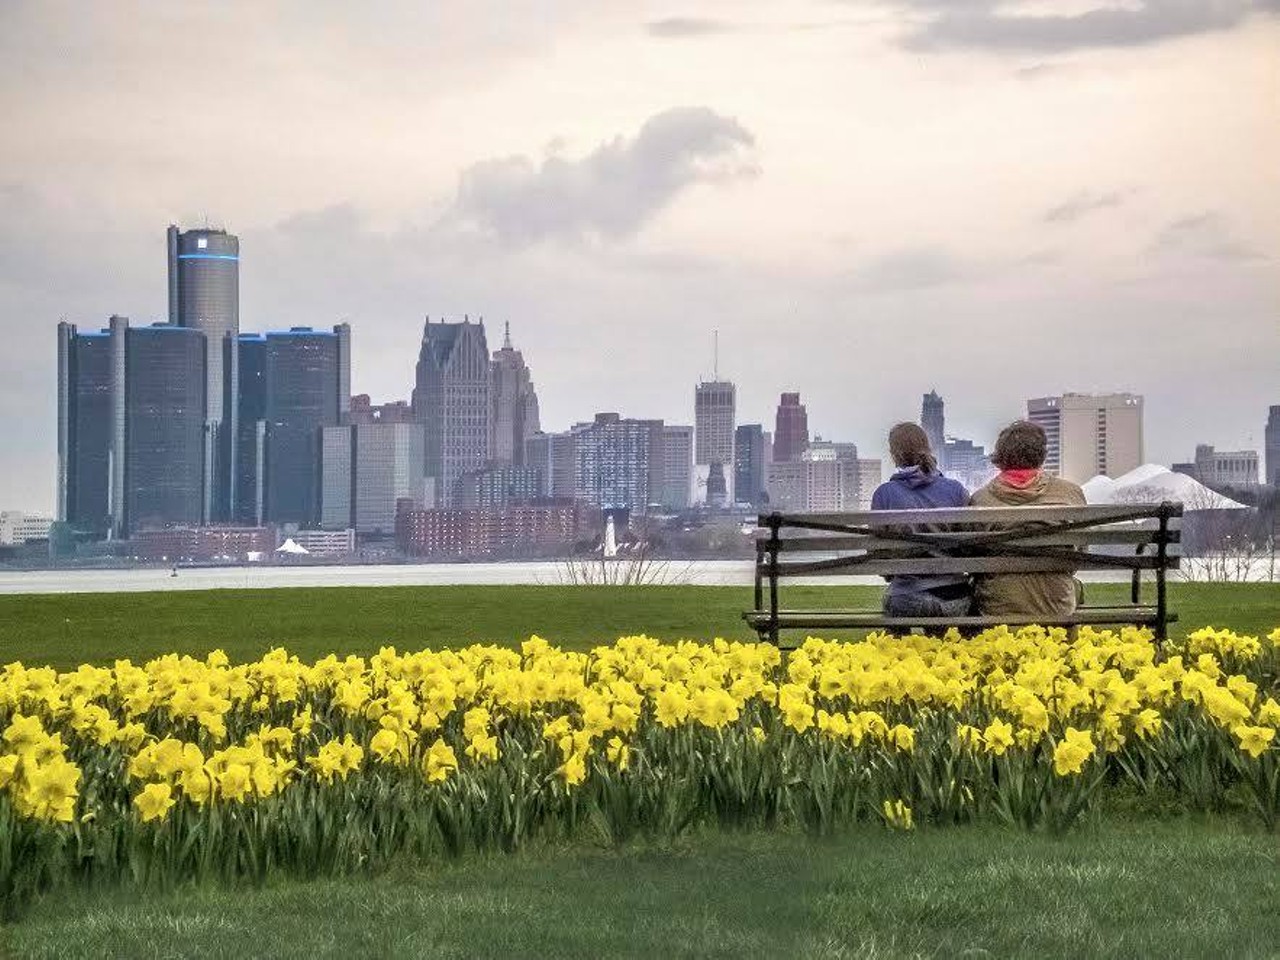 Belle Isle is another essential destination for a floral spectacle. And that view of the city is beyond compare.
Photo via Belle Isle Conservancy Facebook page